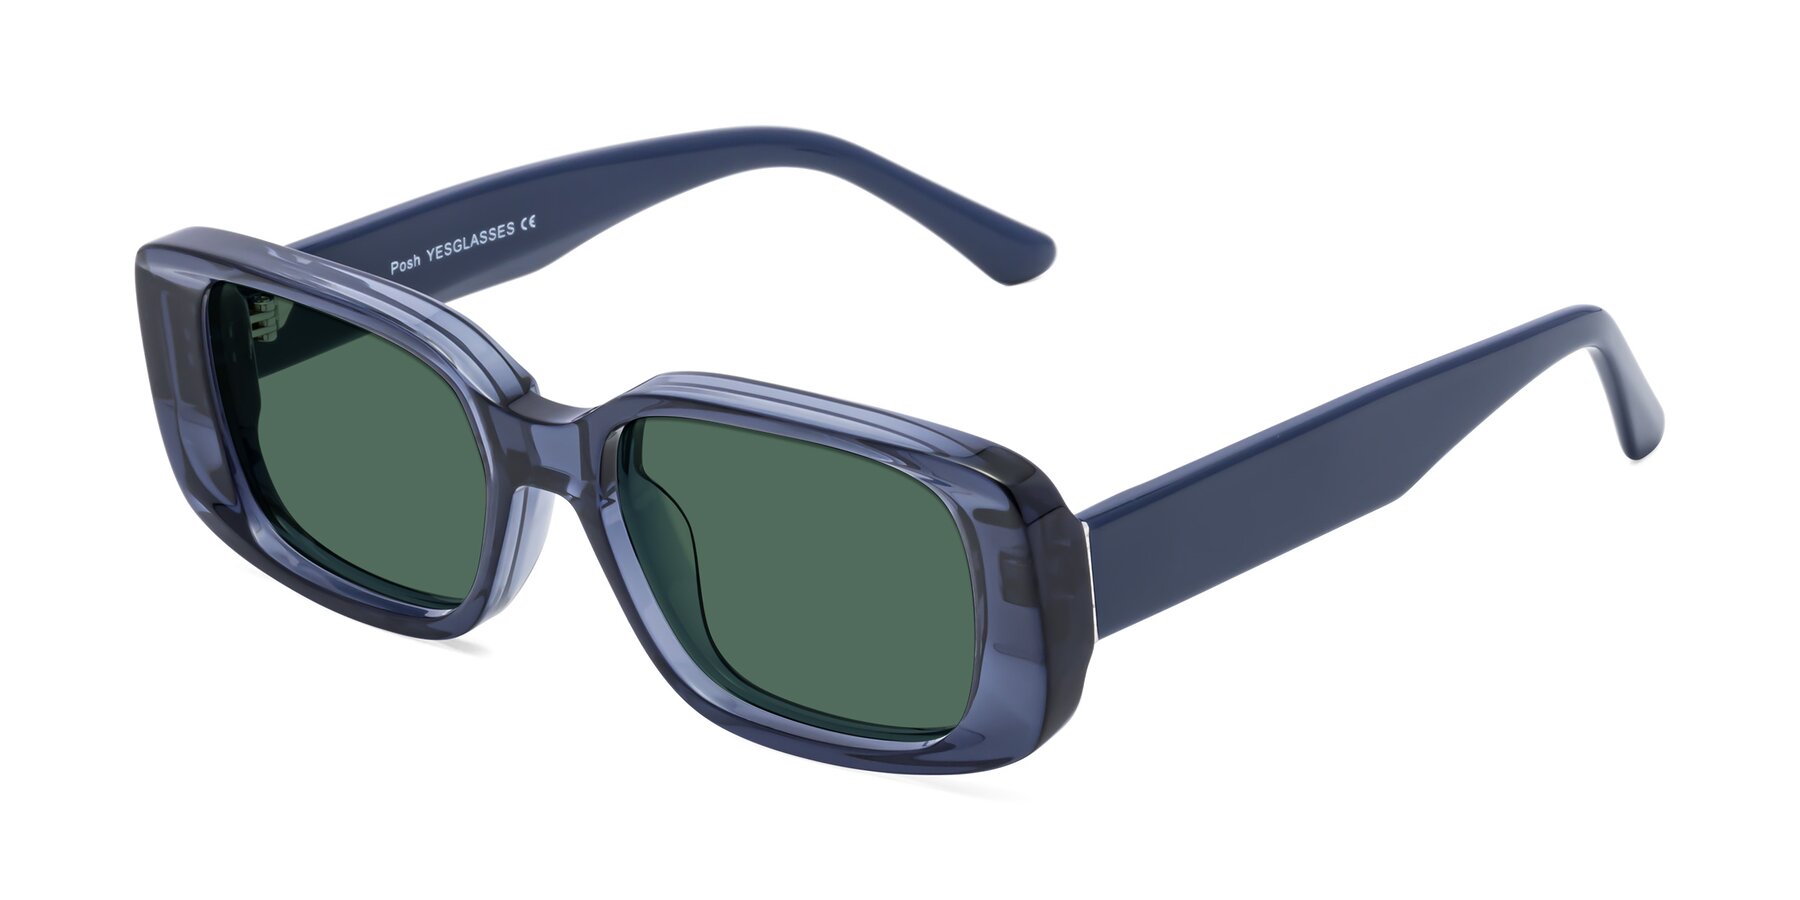 Angle of Posh in Translucent Blue with Green Polarized Lenses